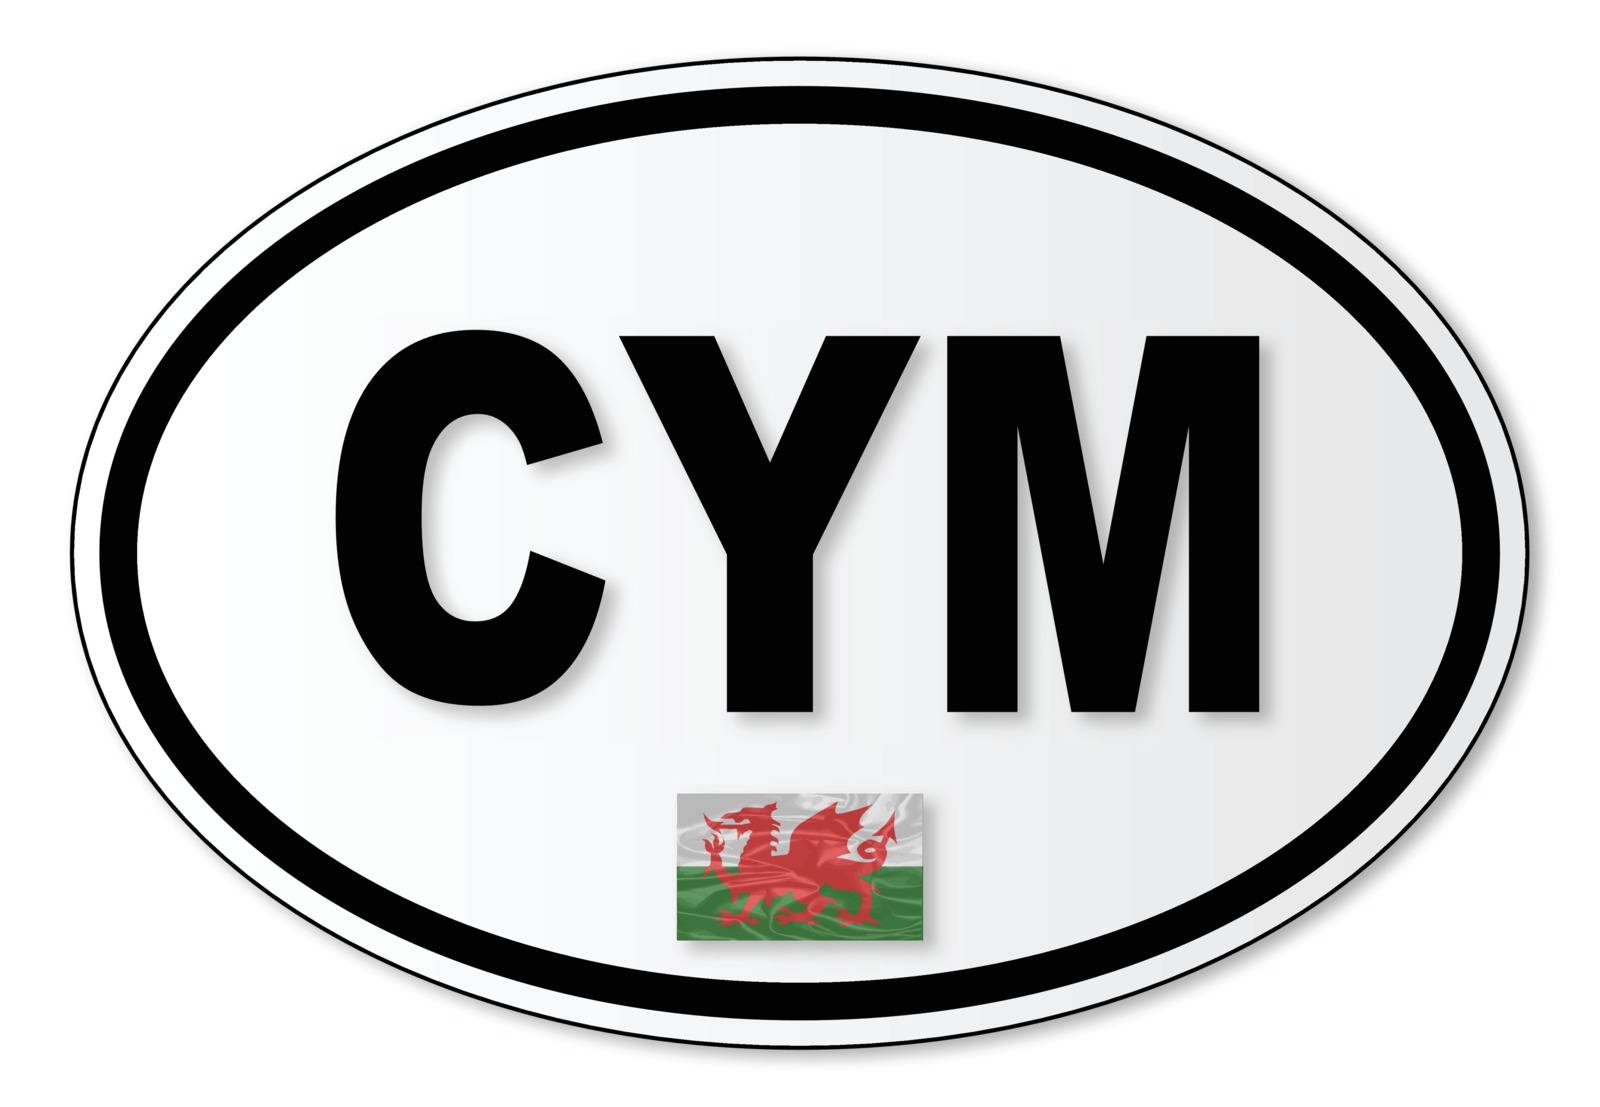 The CYM plate attached to vehicles from Wales travelling abroad